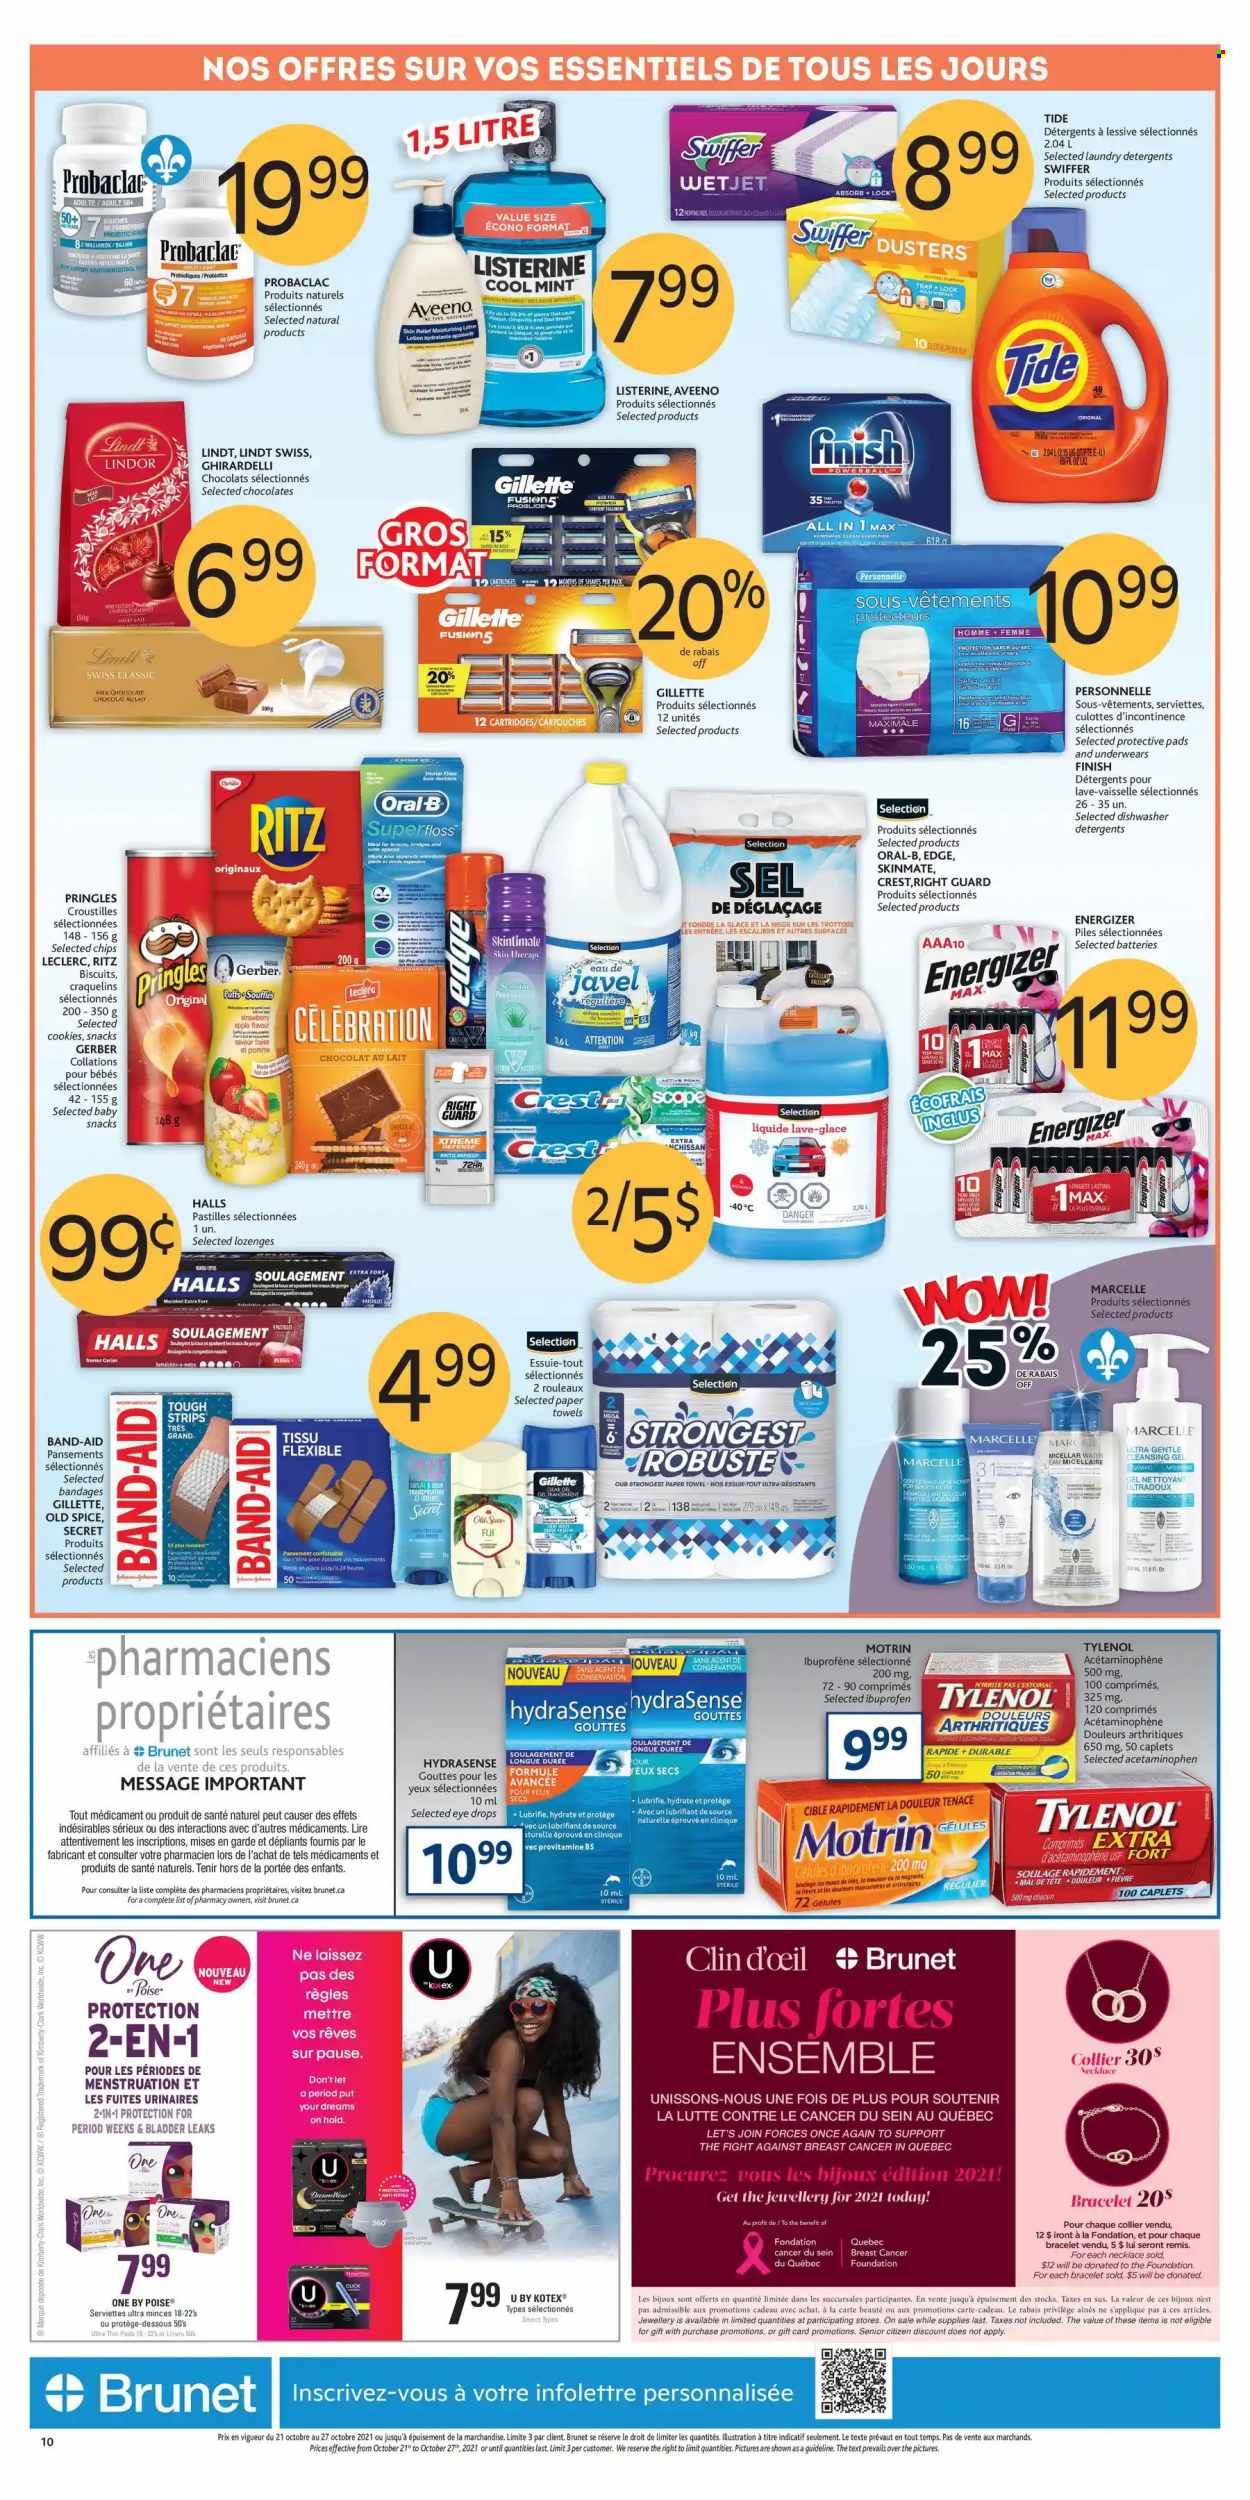 thumbnail - Brunet Flyer - October 21, 2021 - October 27, 2021 - Sales products - Aveeno, kitchen towels, paper towels, Swiffer, Tide, Crest, Kotex, Clinique, micellar water, puffs, body lotion, Gerber, Tylenol, Halls, Ibuprofen, probiotics, eye drops, Motrin, band-aid, Energizer, Gillette, Listerine, Old Spice, Oral-B, Lindt, Lindor. Page 9.